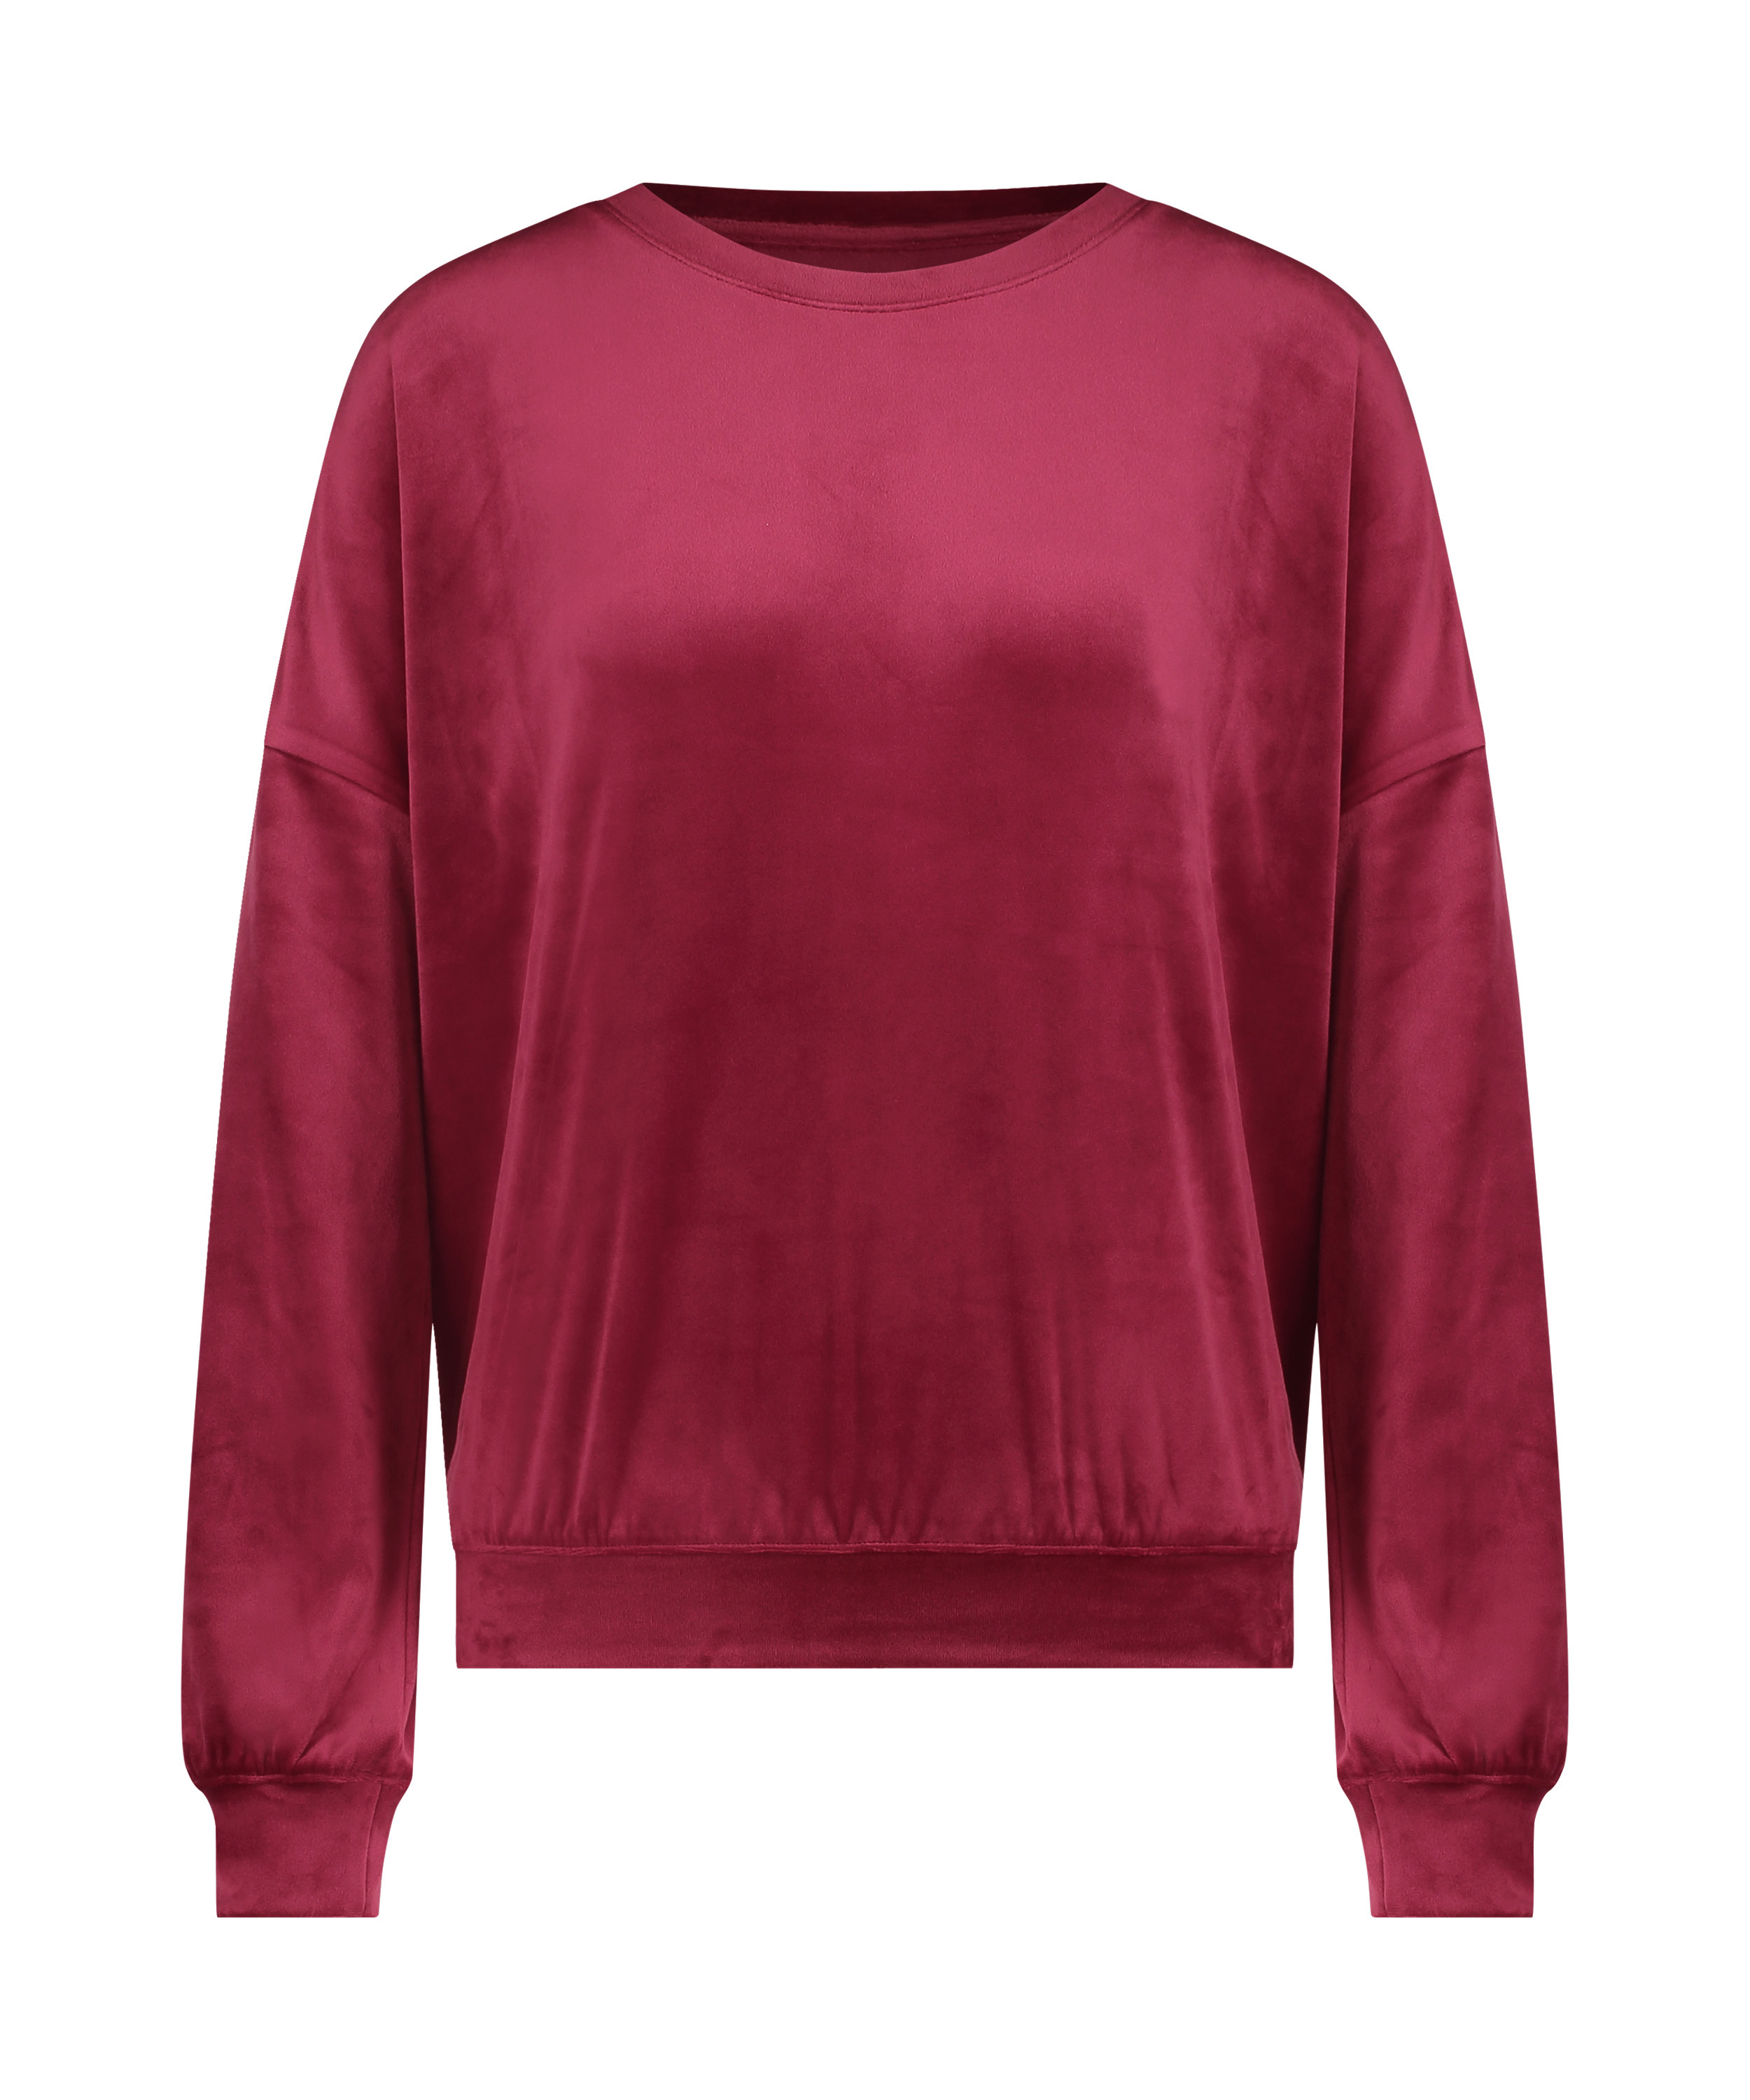 Velours Top, Rot, main